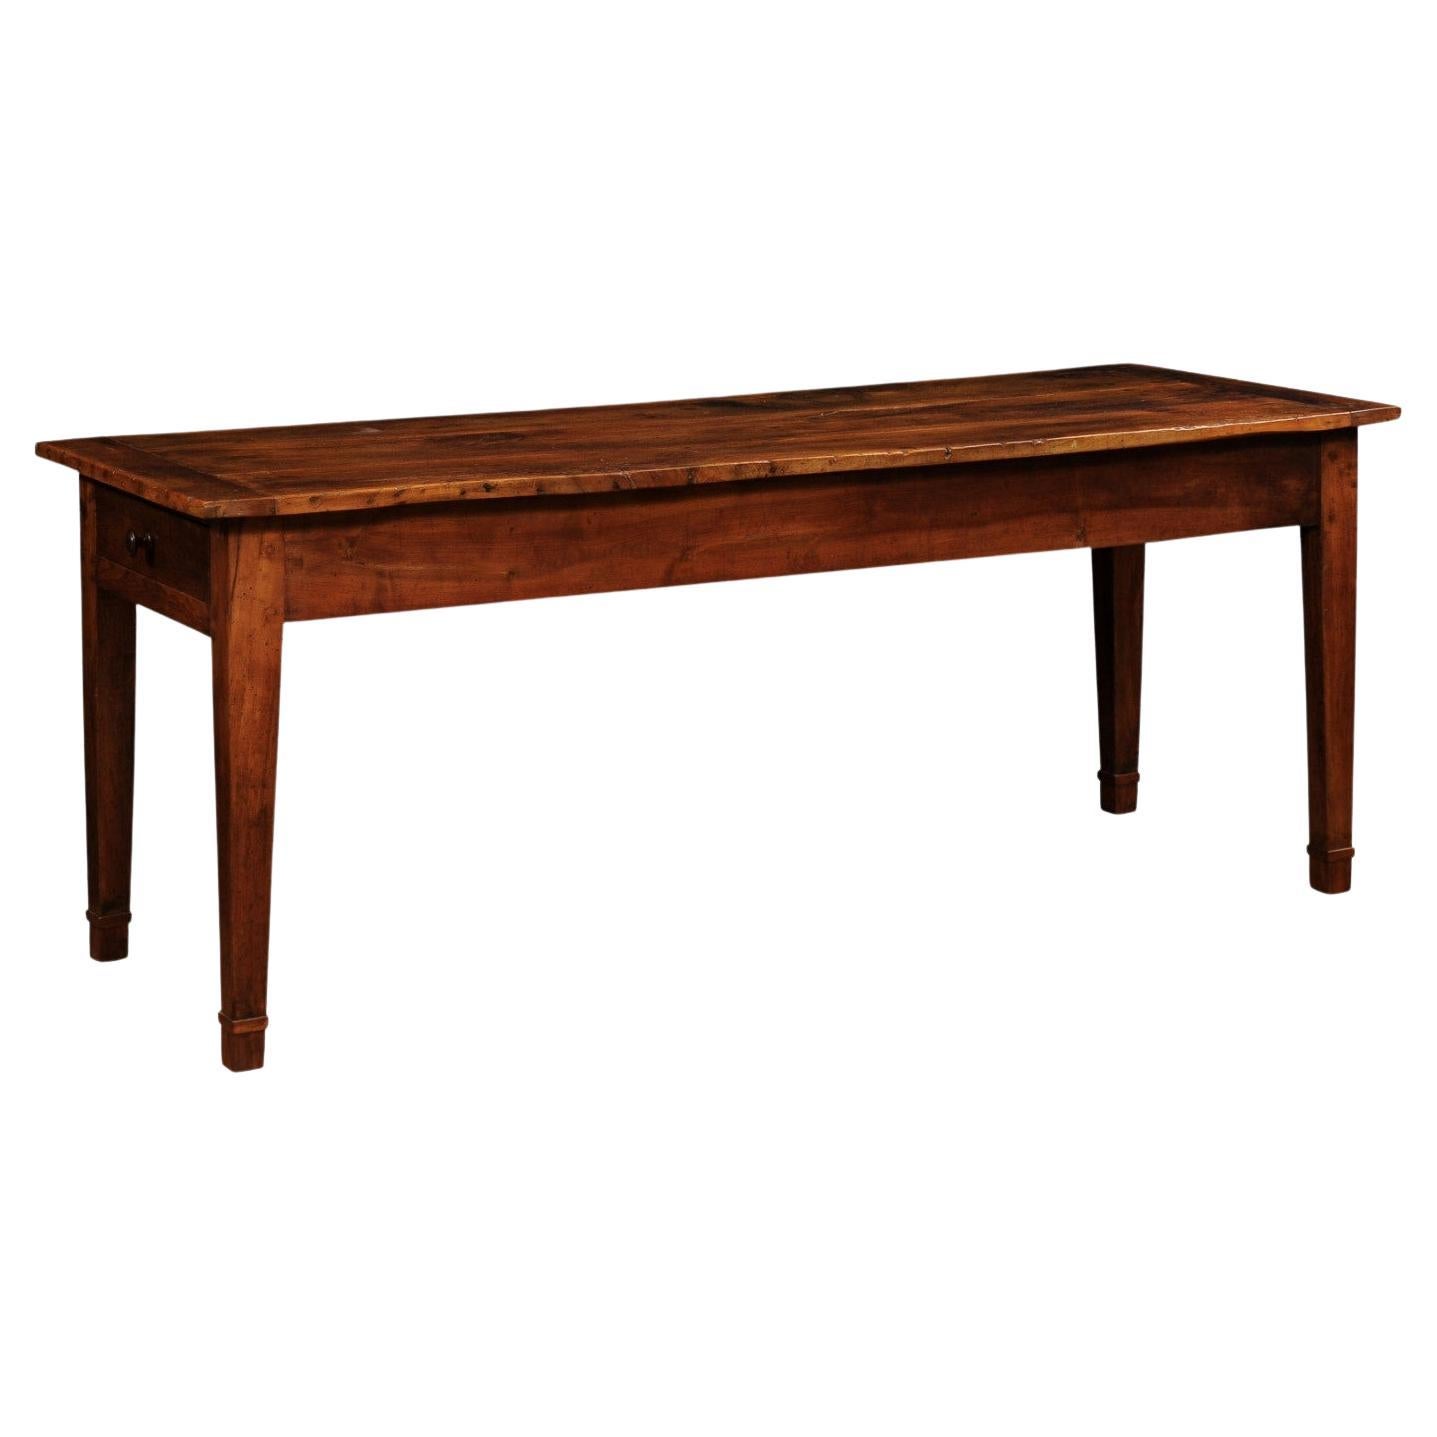 French Louis XVI Style Walnut and Elm Table with Lateral Drawer and Tapered Legs